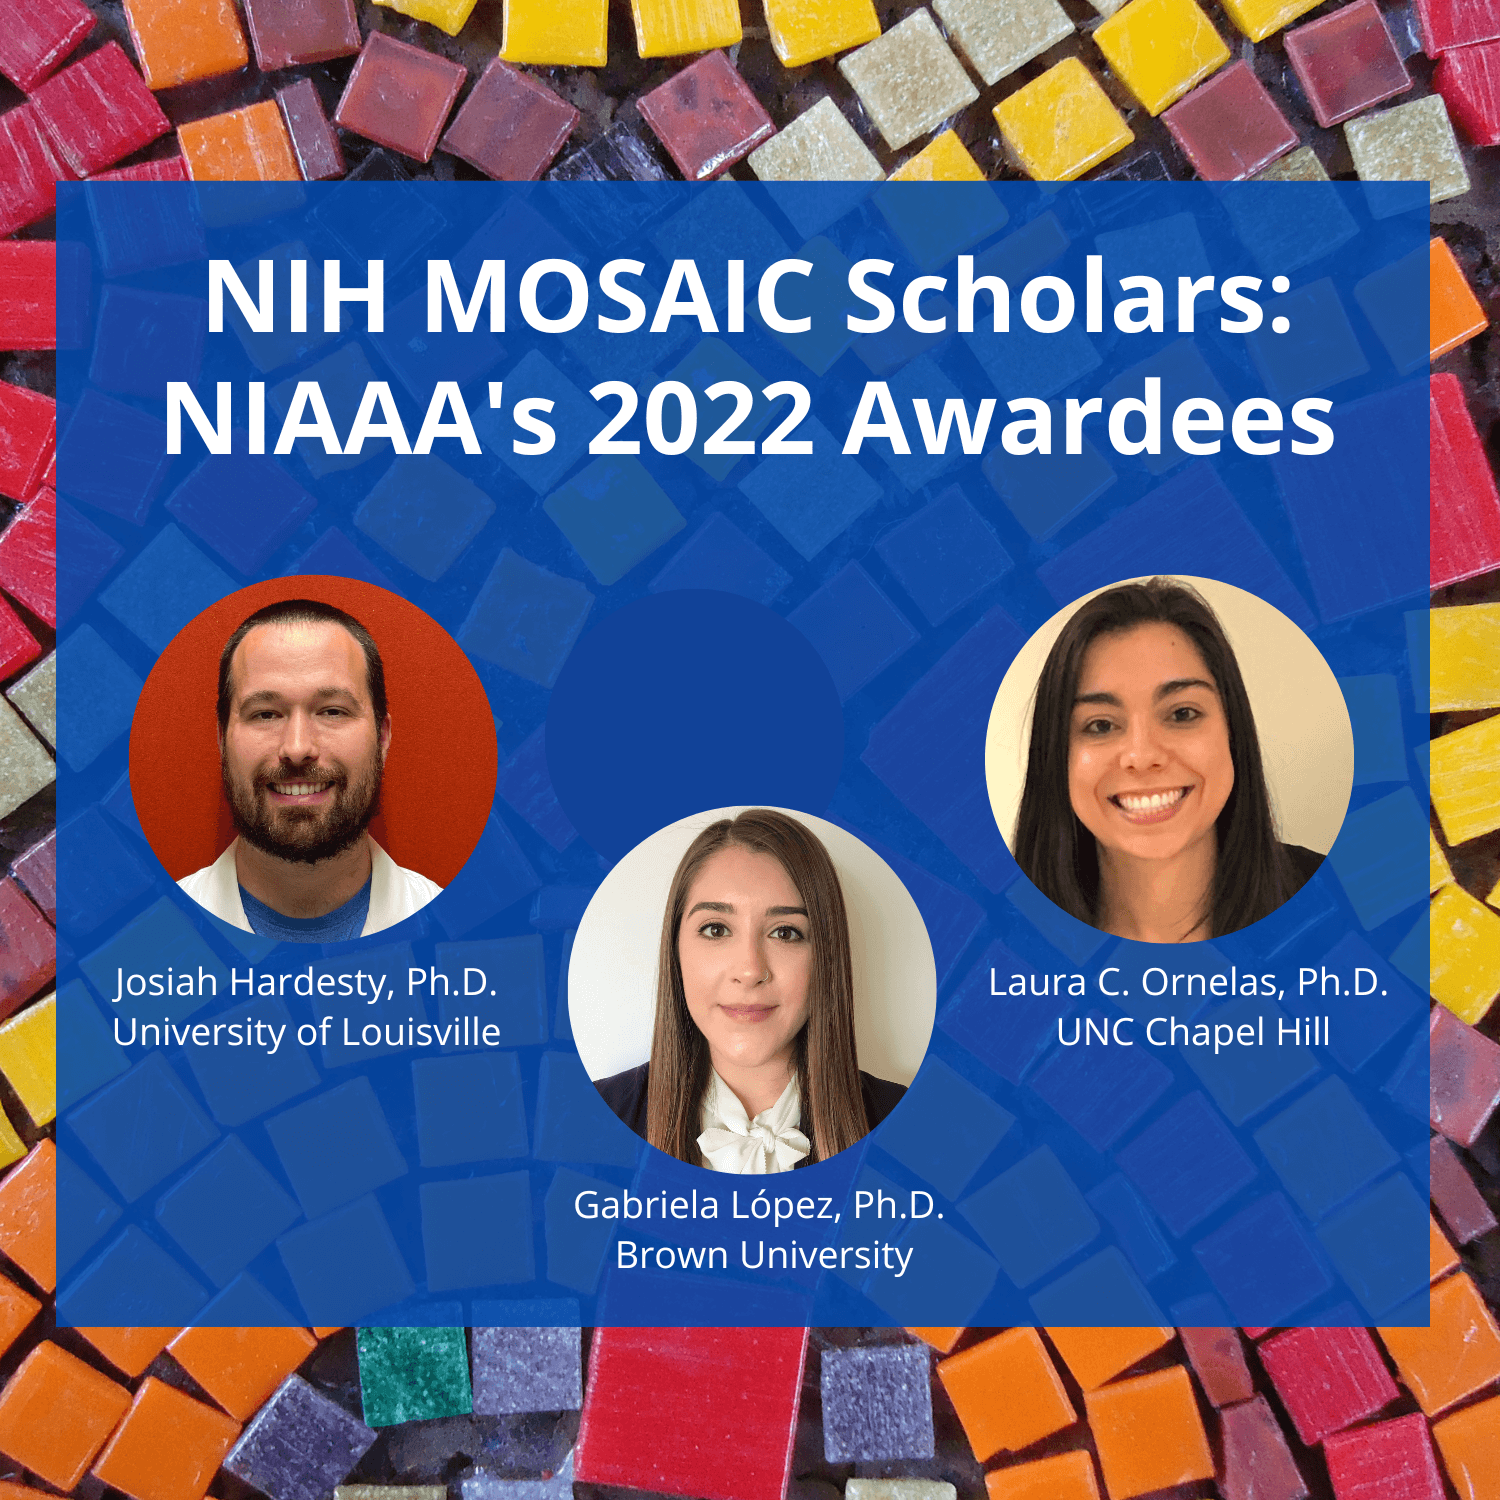 Image against a tile mosaic background. Text overlay says, “NIH MOSAIC Scholars: NIAAA’s 2022 Awardees.” Photograph of Josiah Hardesty, Ph.D., University of Louisville. Photograph of Gabriella Lopez, Ph.D., Brown University. Photograph of Laura C. Ornelas, Ph.D., UNC Chapel Hill.